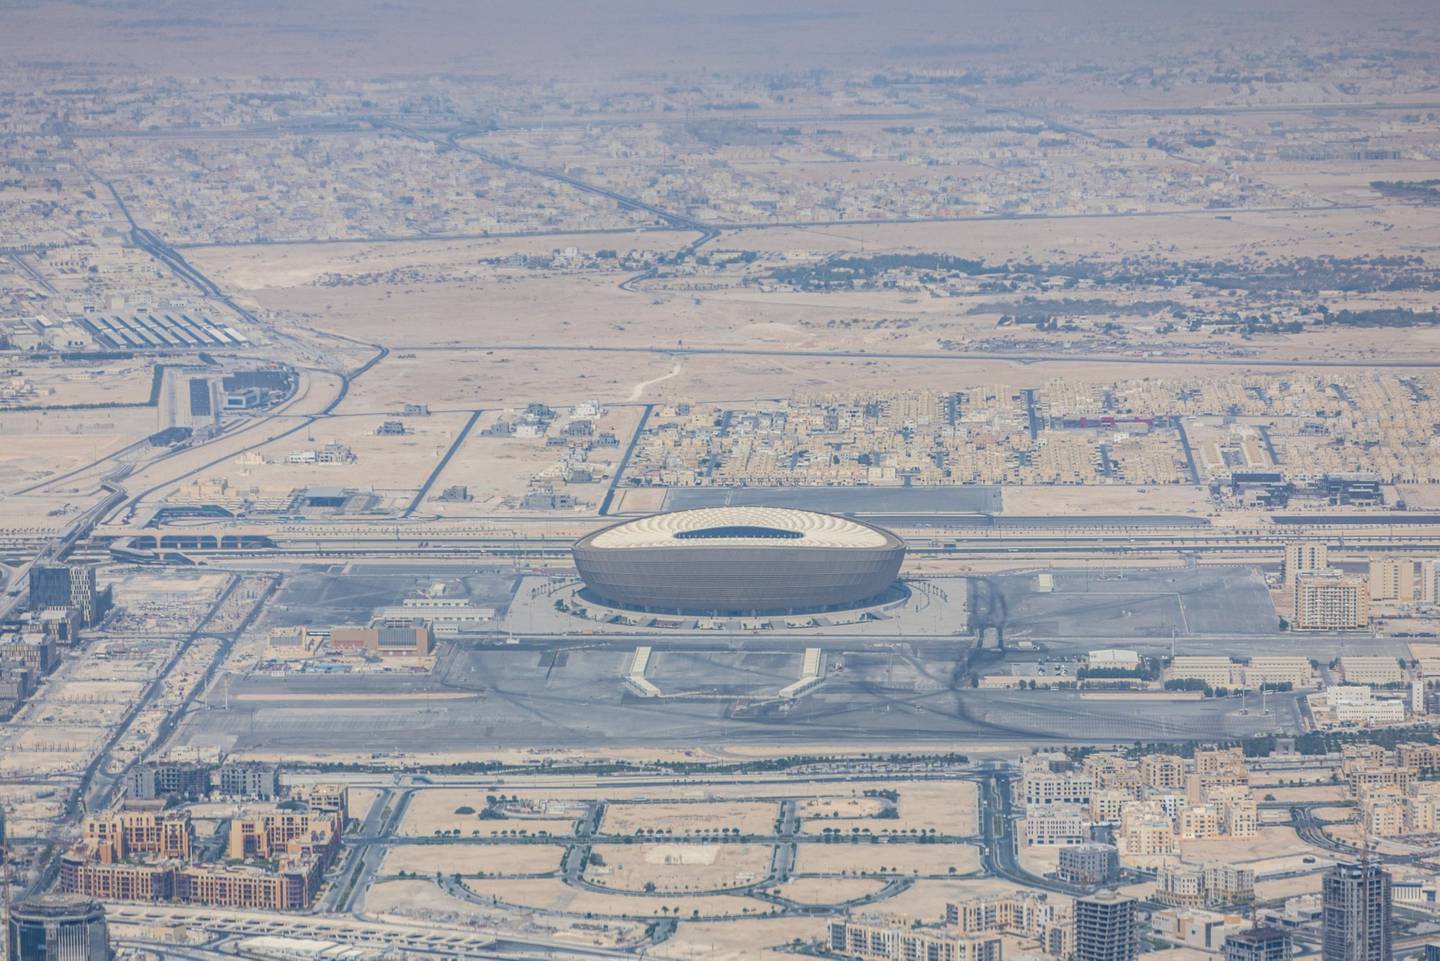 The Lusail football stadium, a venue for the upcoming 2022 FIFA World Cup, in Doha. Photographer: Christopher Pike/Bloombergdfd